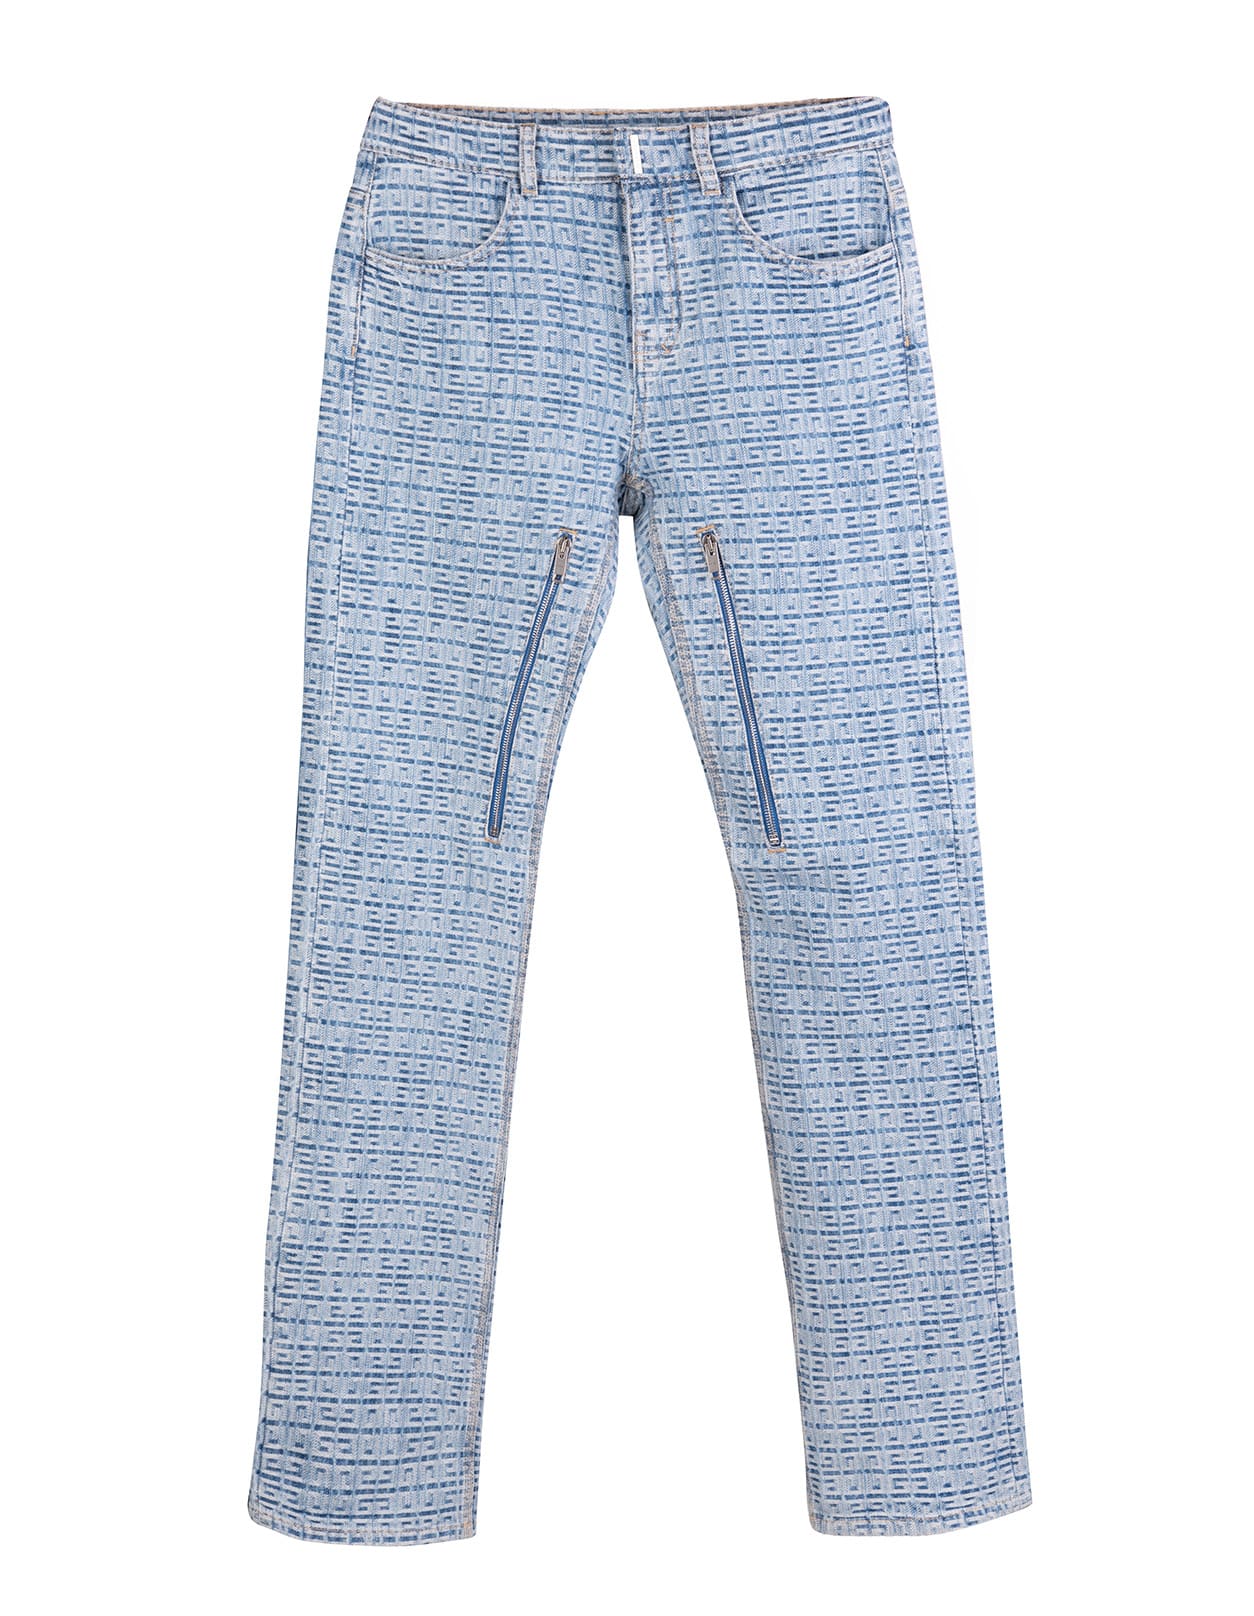 Givenchy Man 4g Jeans In Light Wash Blue Denim With Zip